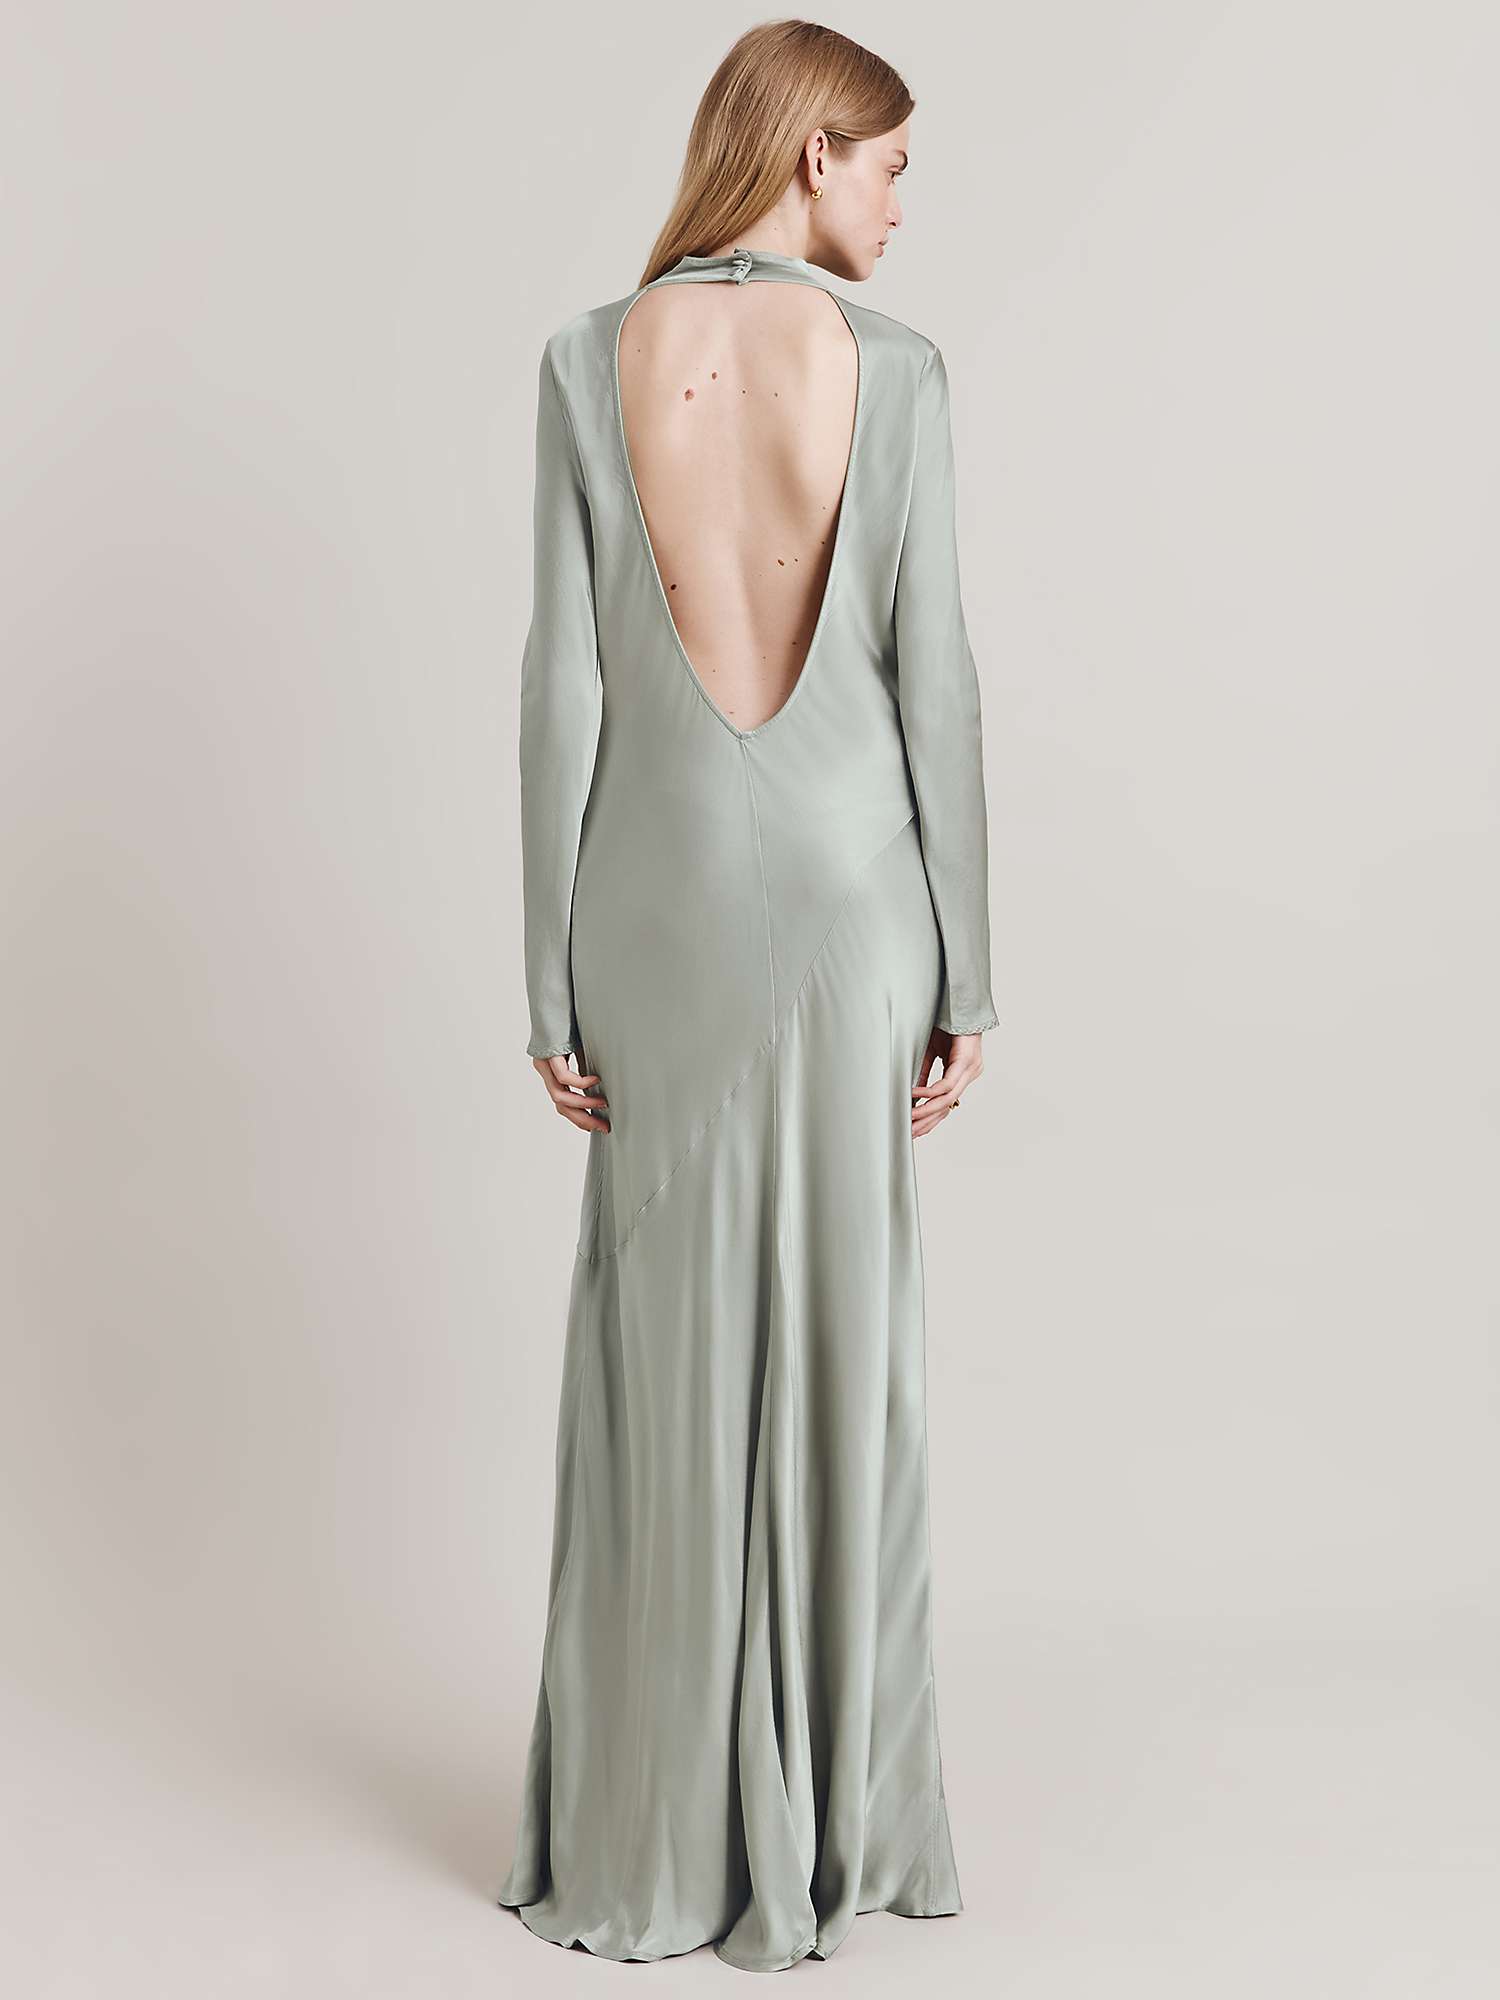 Buy Ghost Rayna High Neck Low Back Maxi Dress Online at johnlewis.com